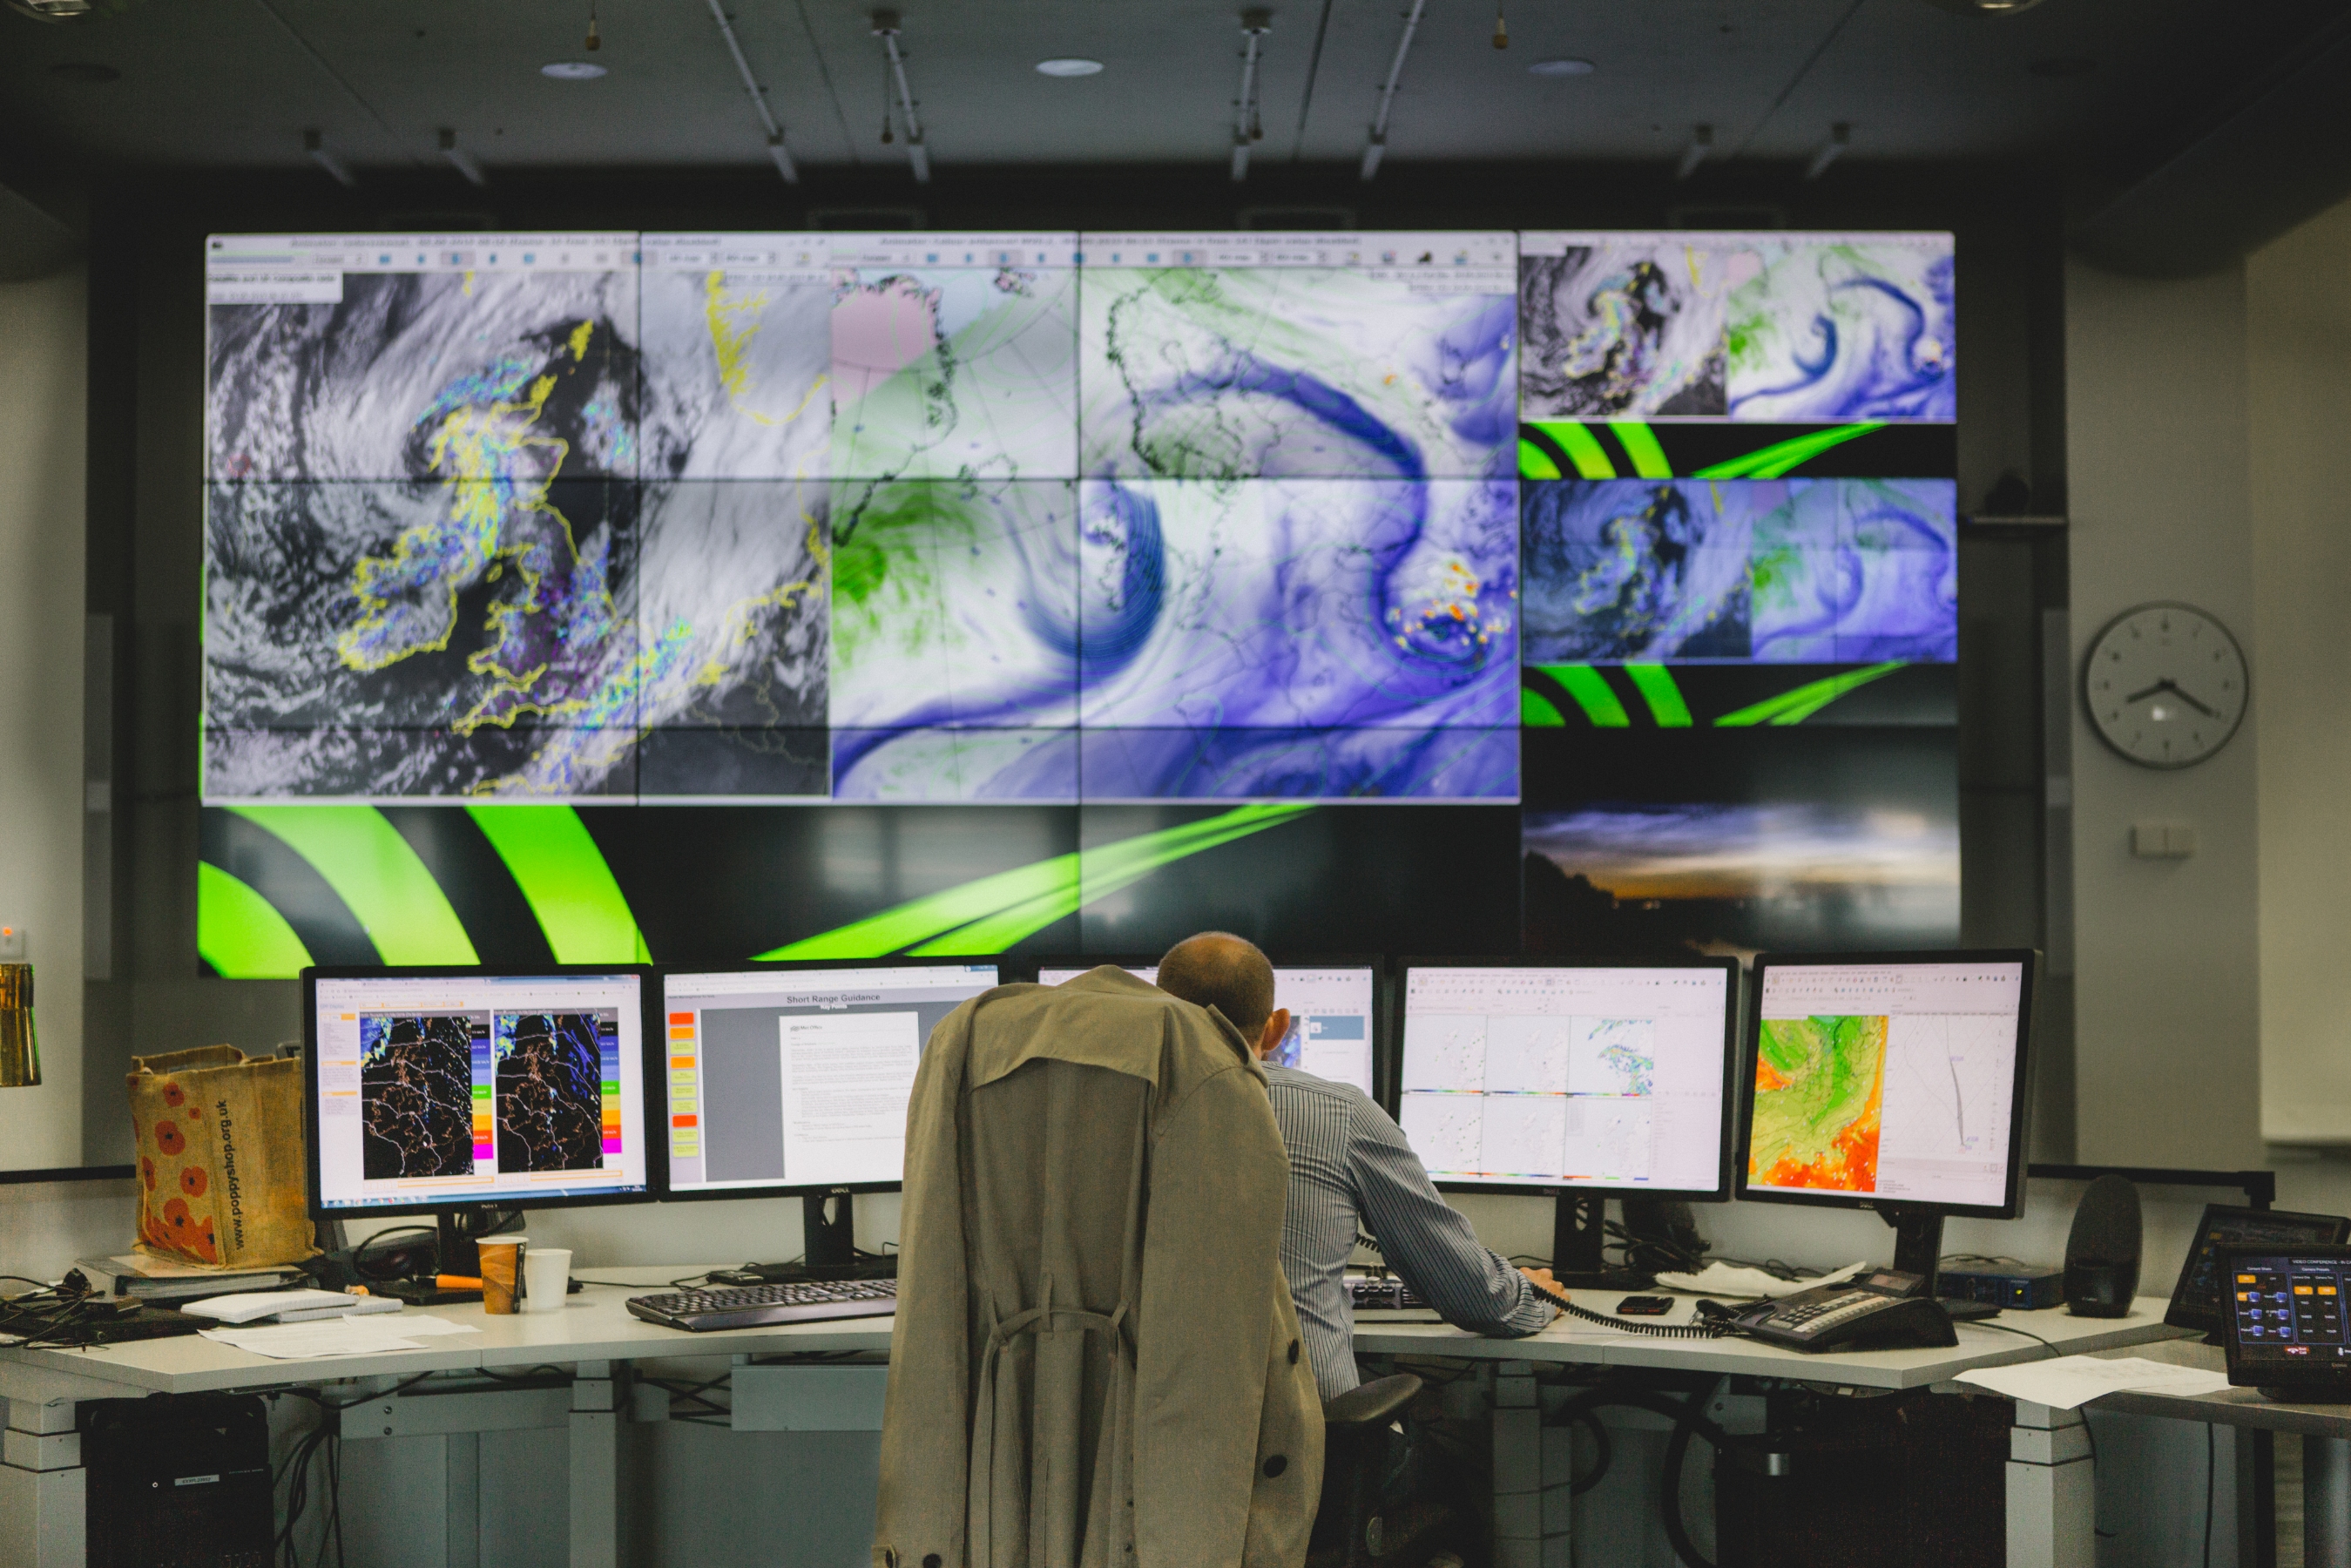 This photo features a large computer screen showing a weather system. A person is sat at a desk in front of it.